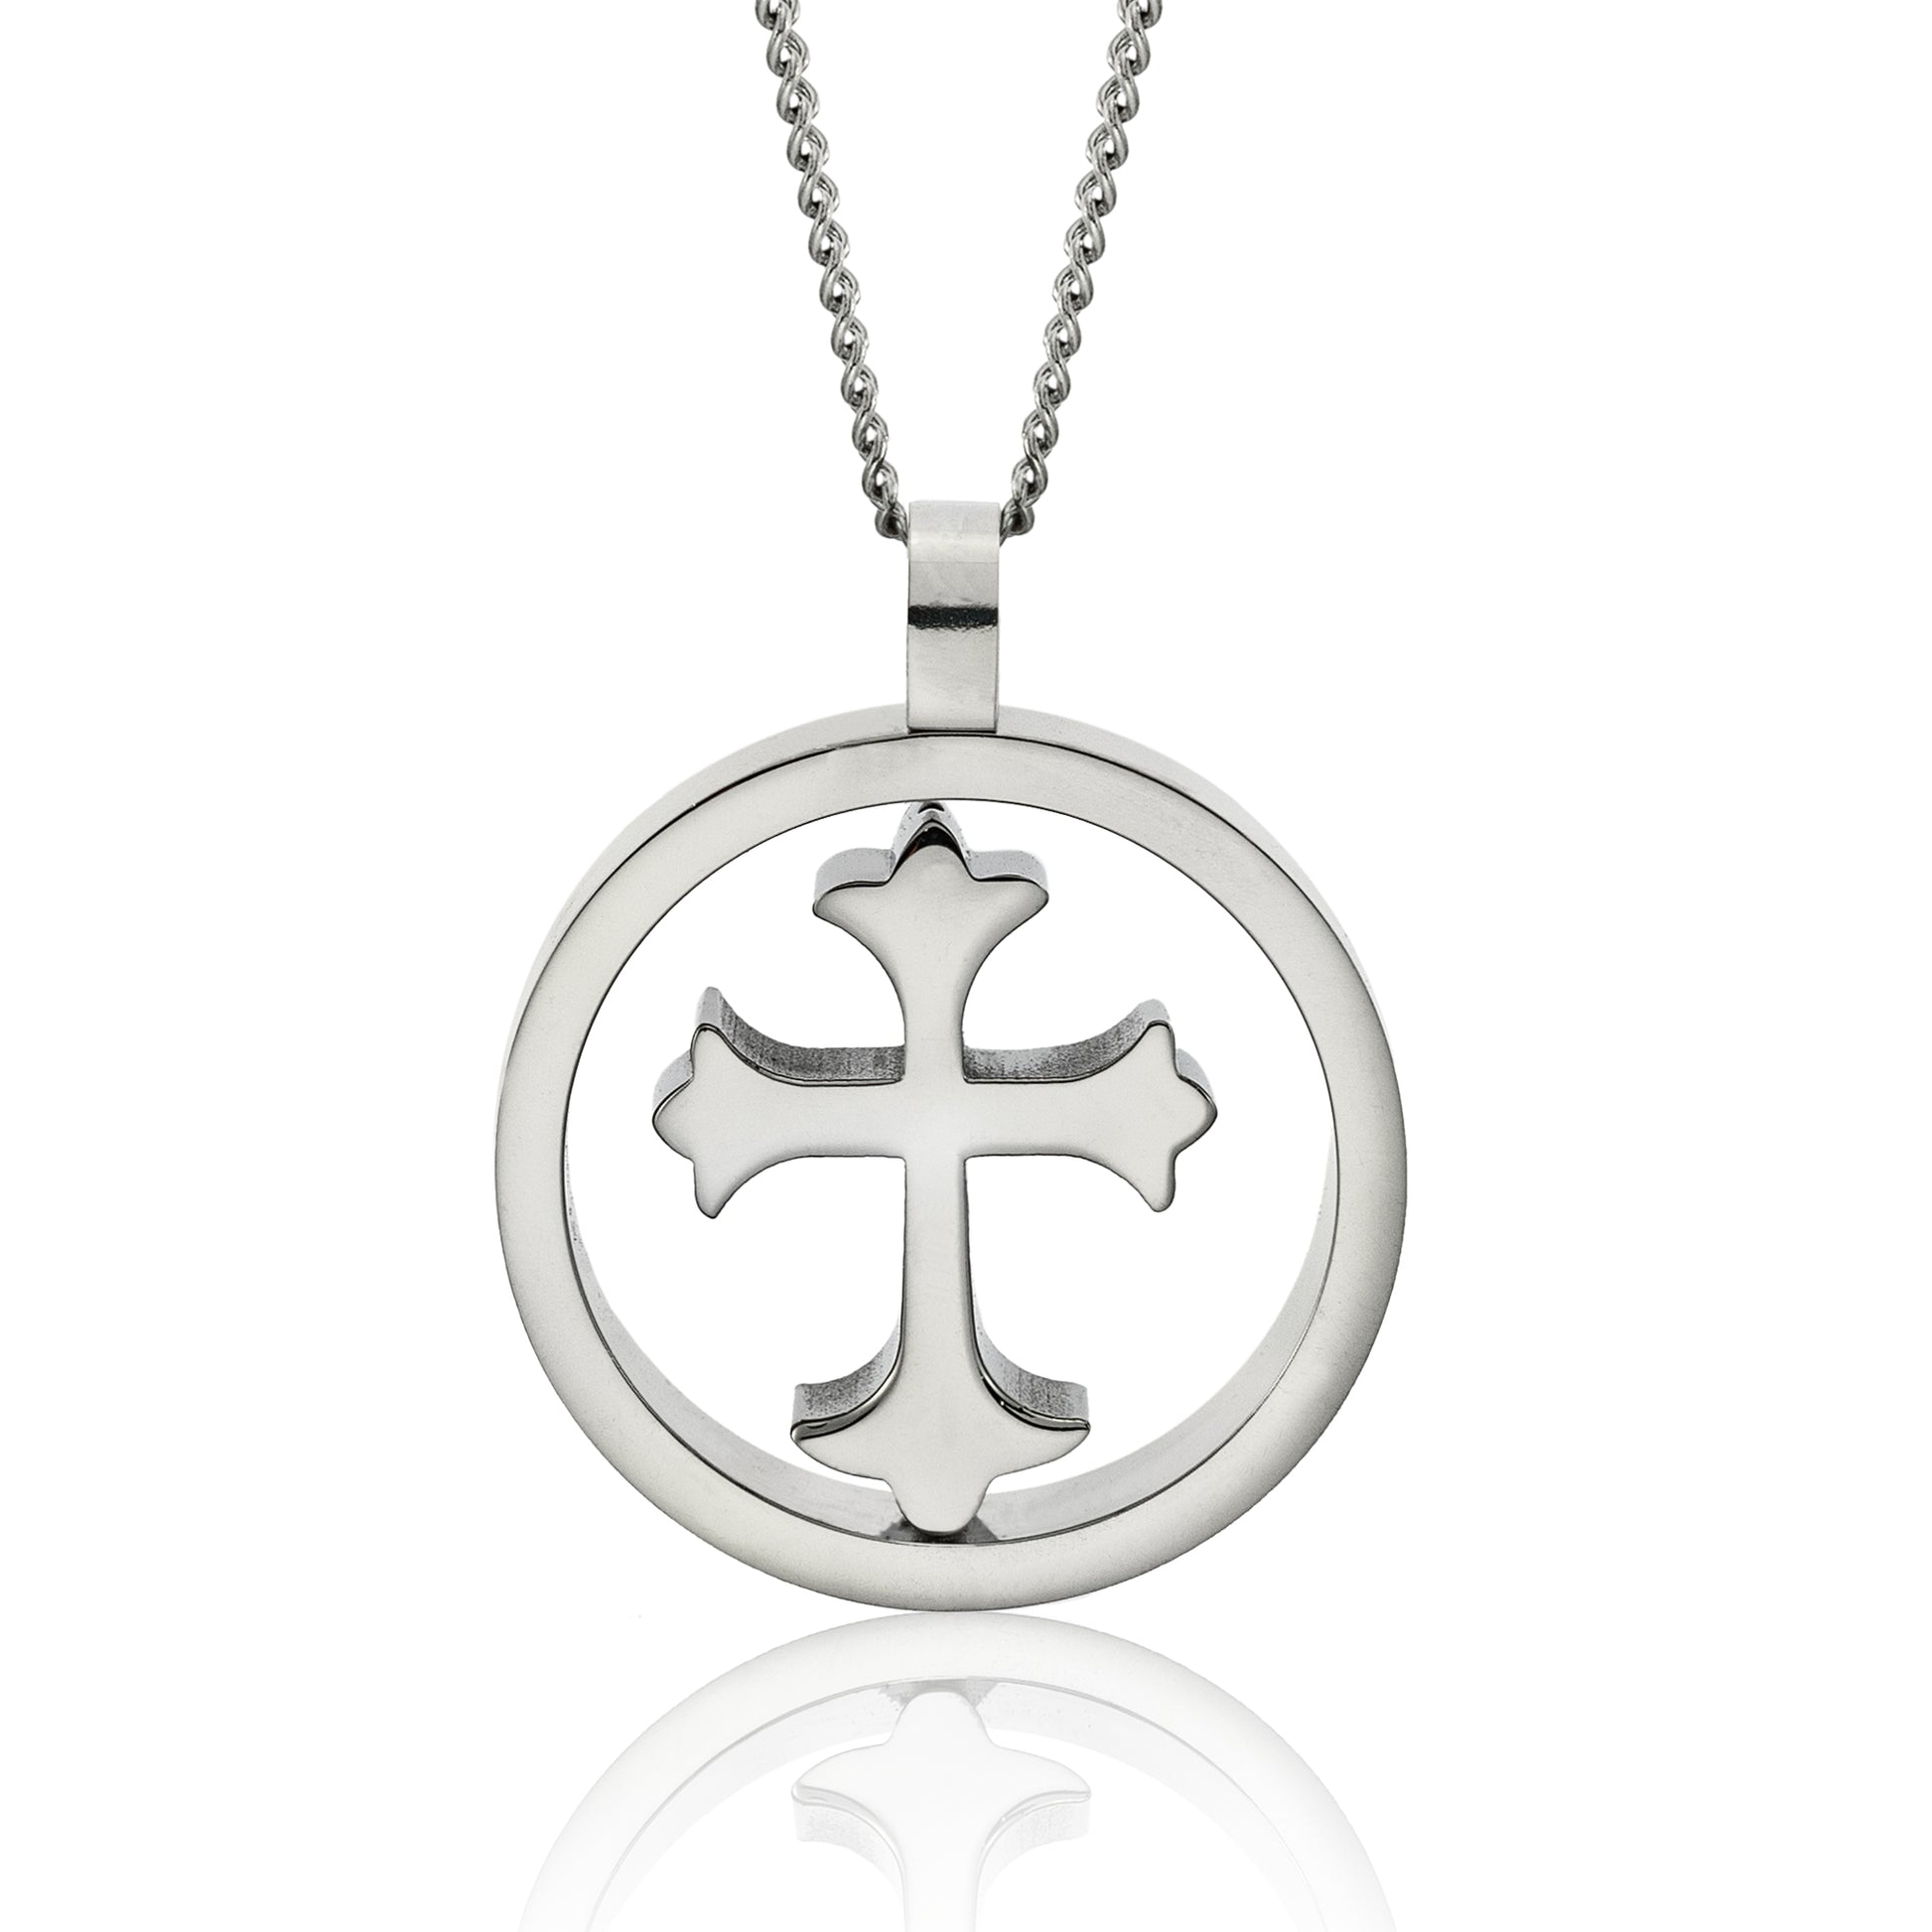 Two-Sided Stainless Steel Encircled Cross Pendant Necklace